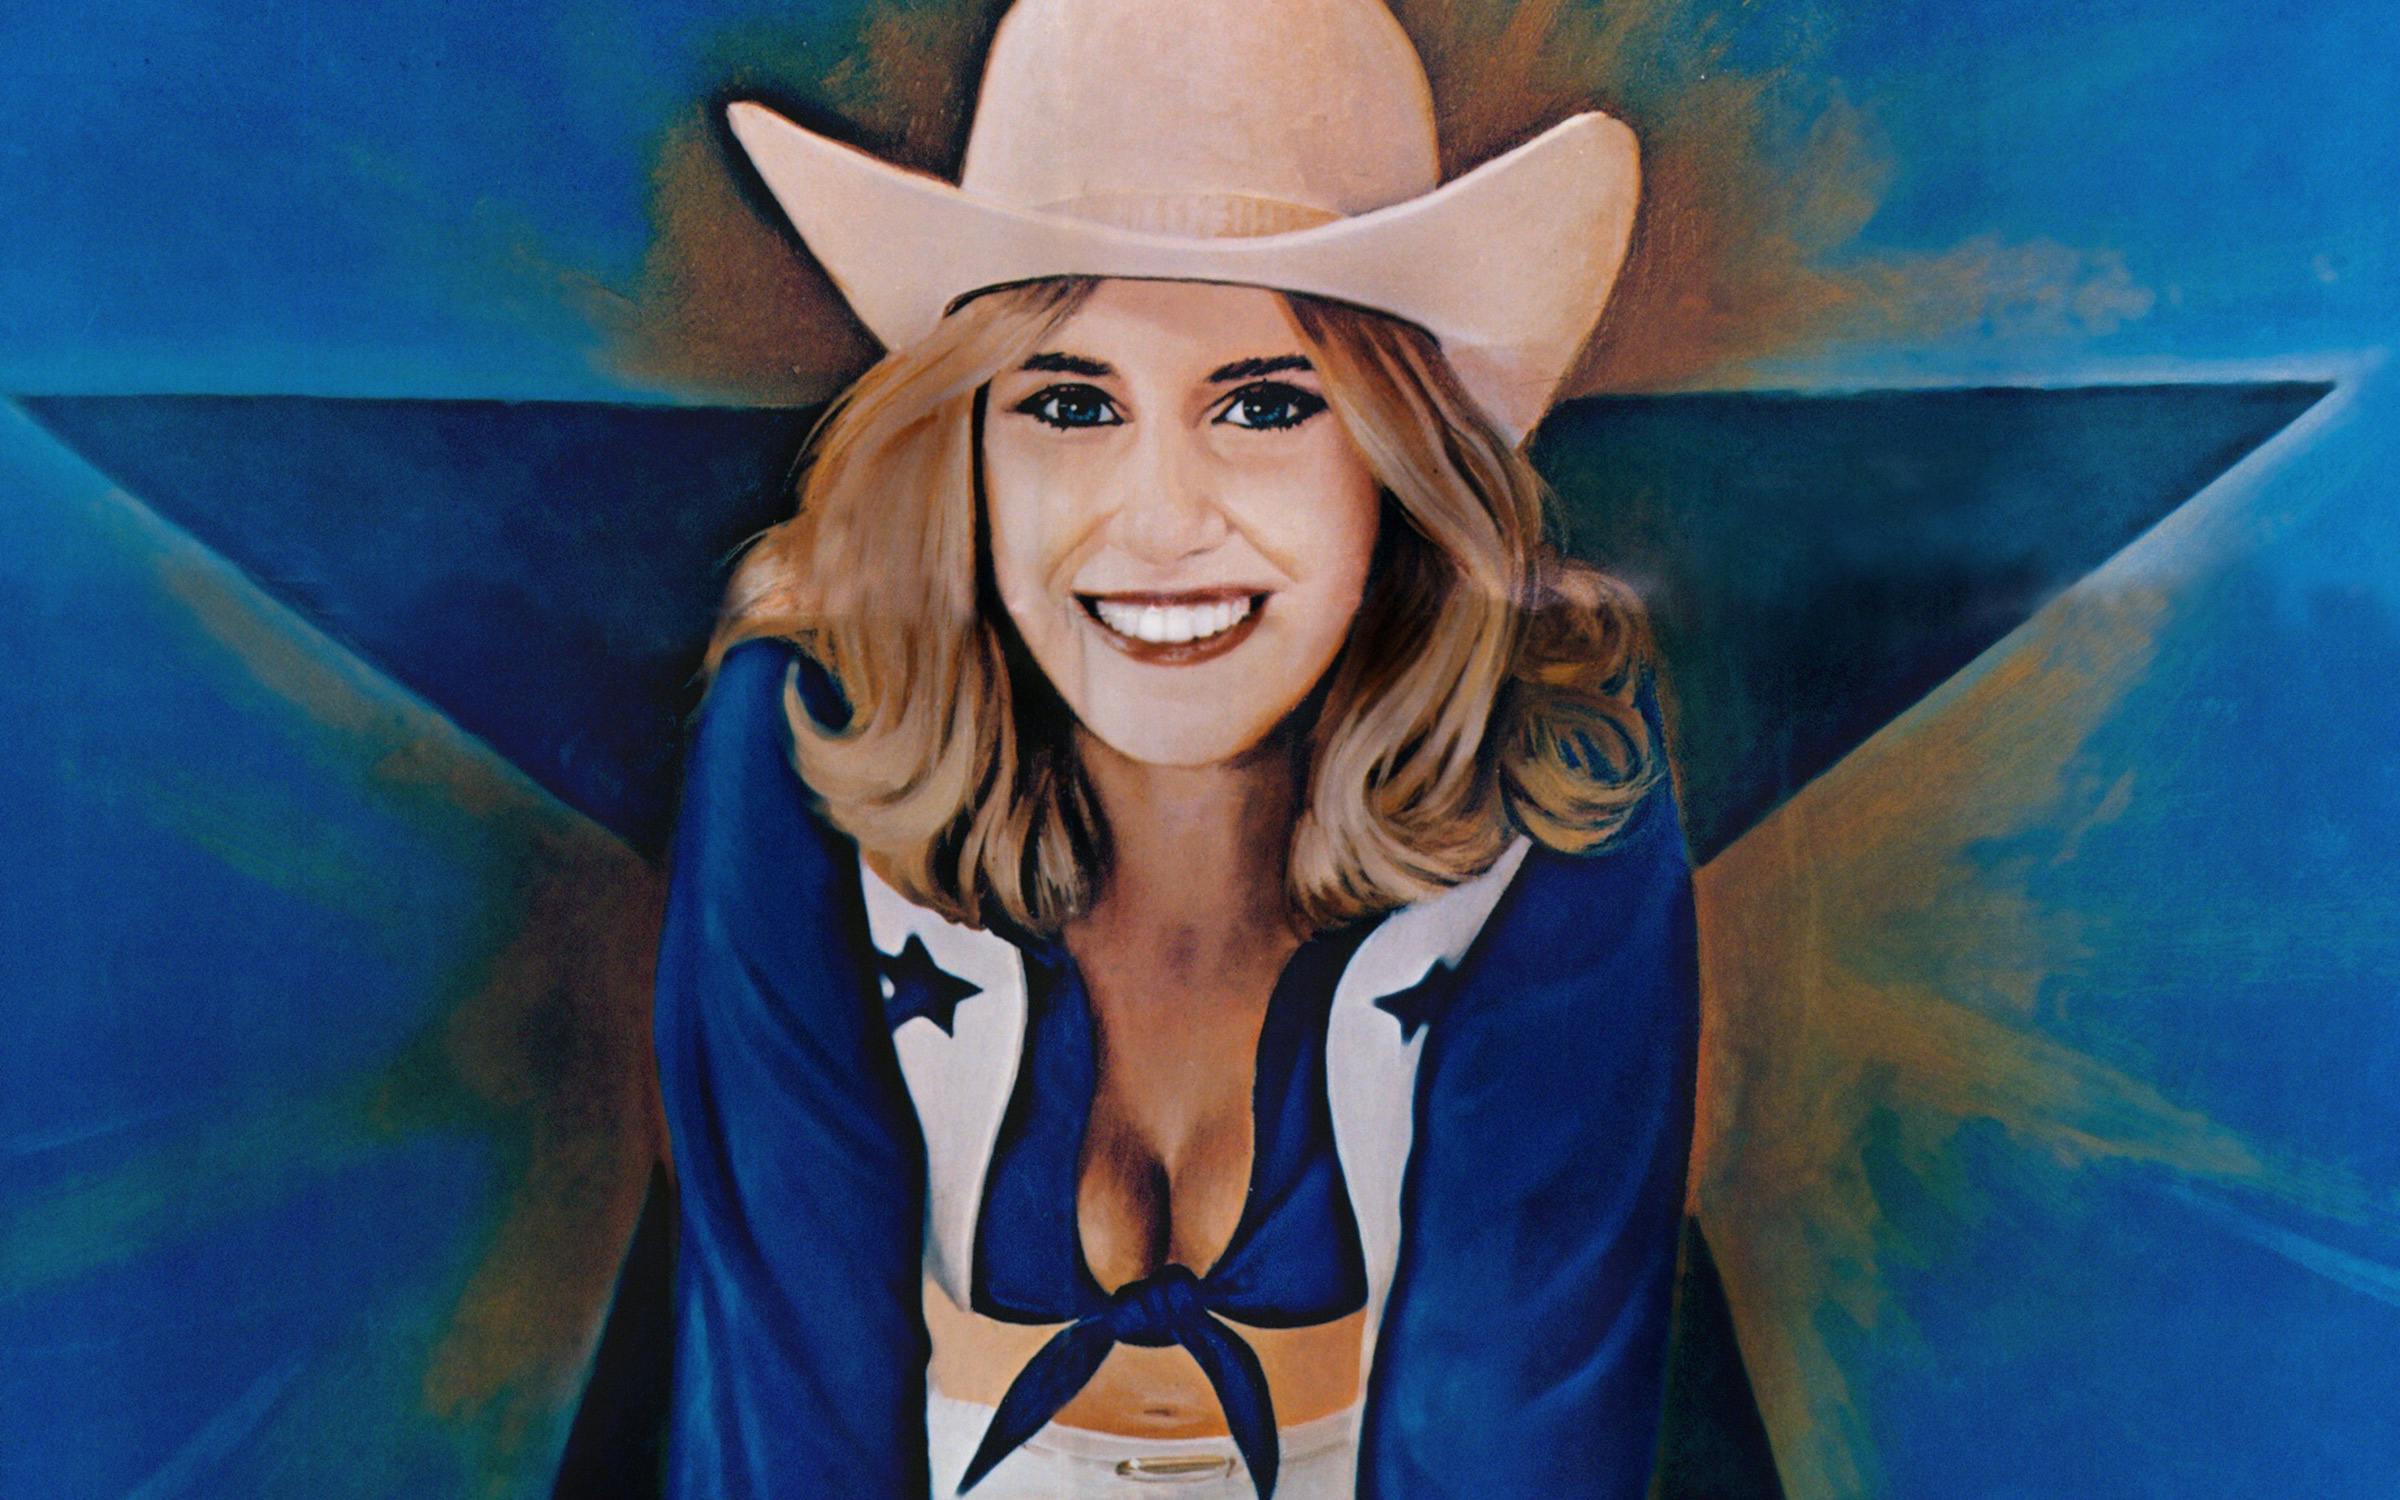 beverley brice recommends streaming debbie does dallas pic